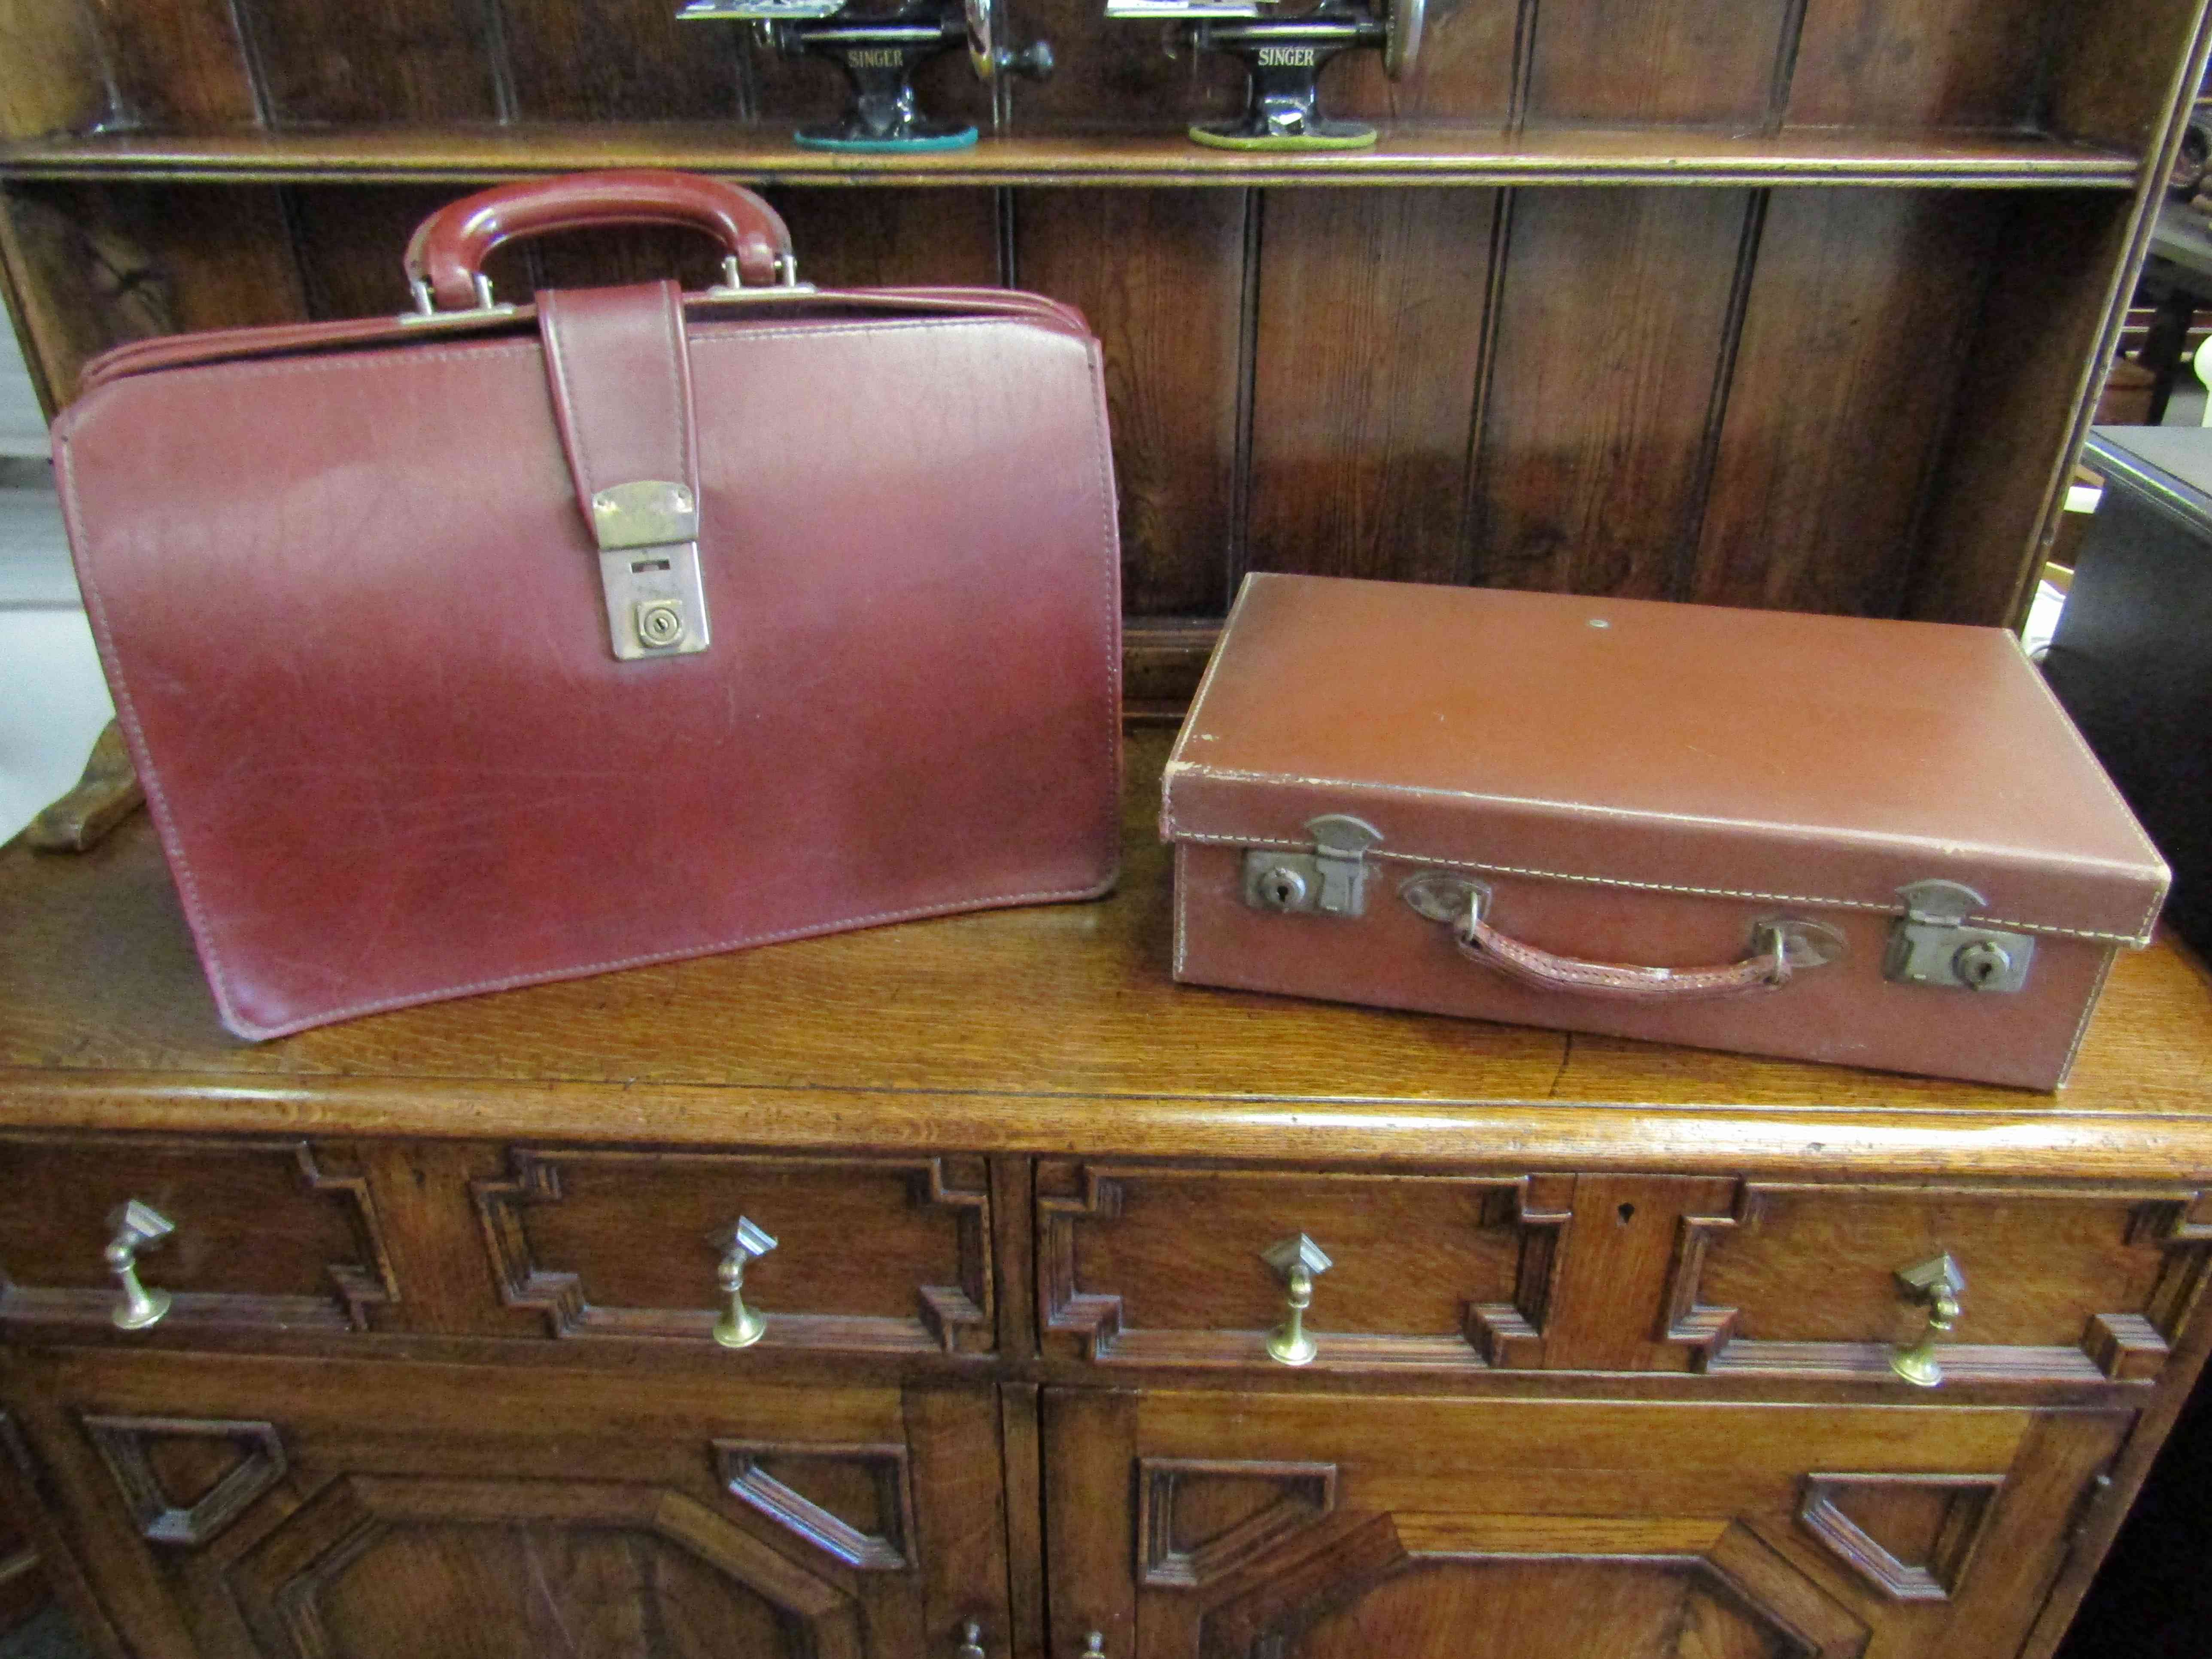 A briefcase and another